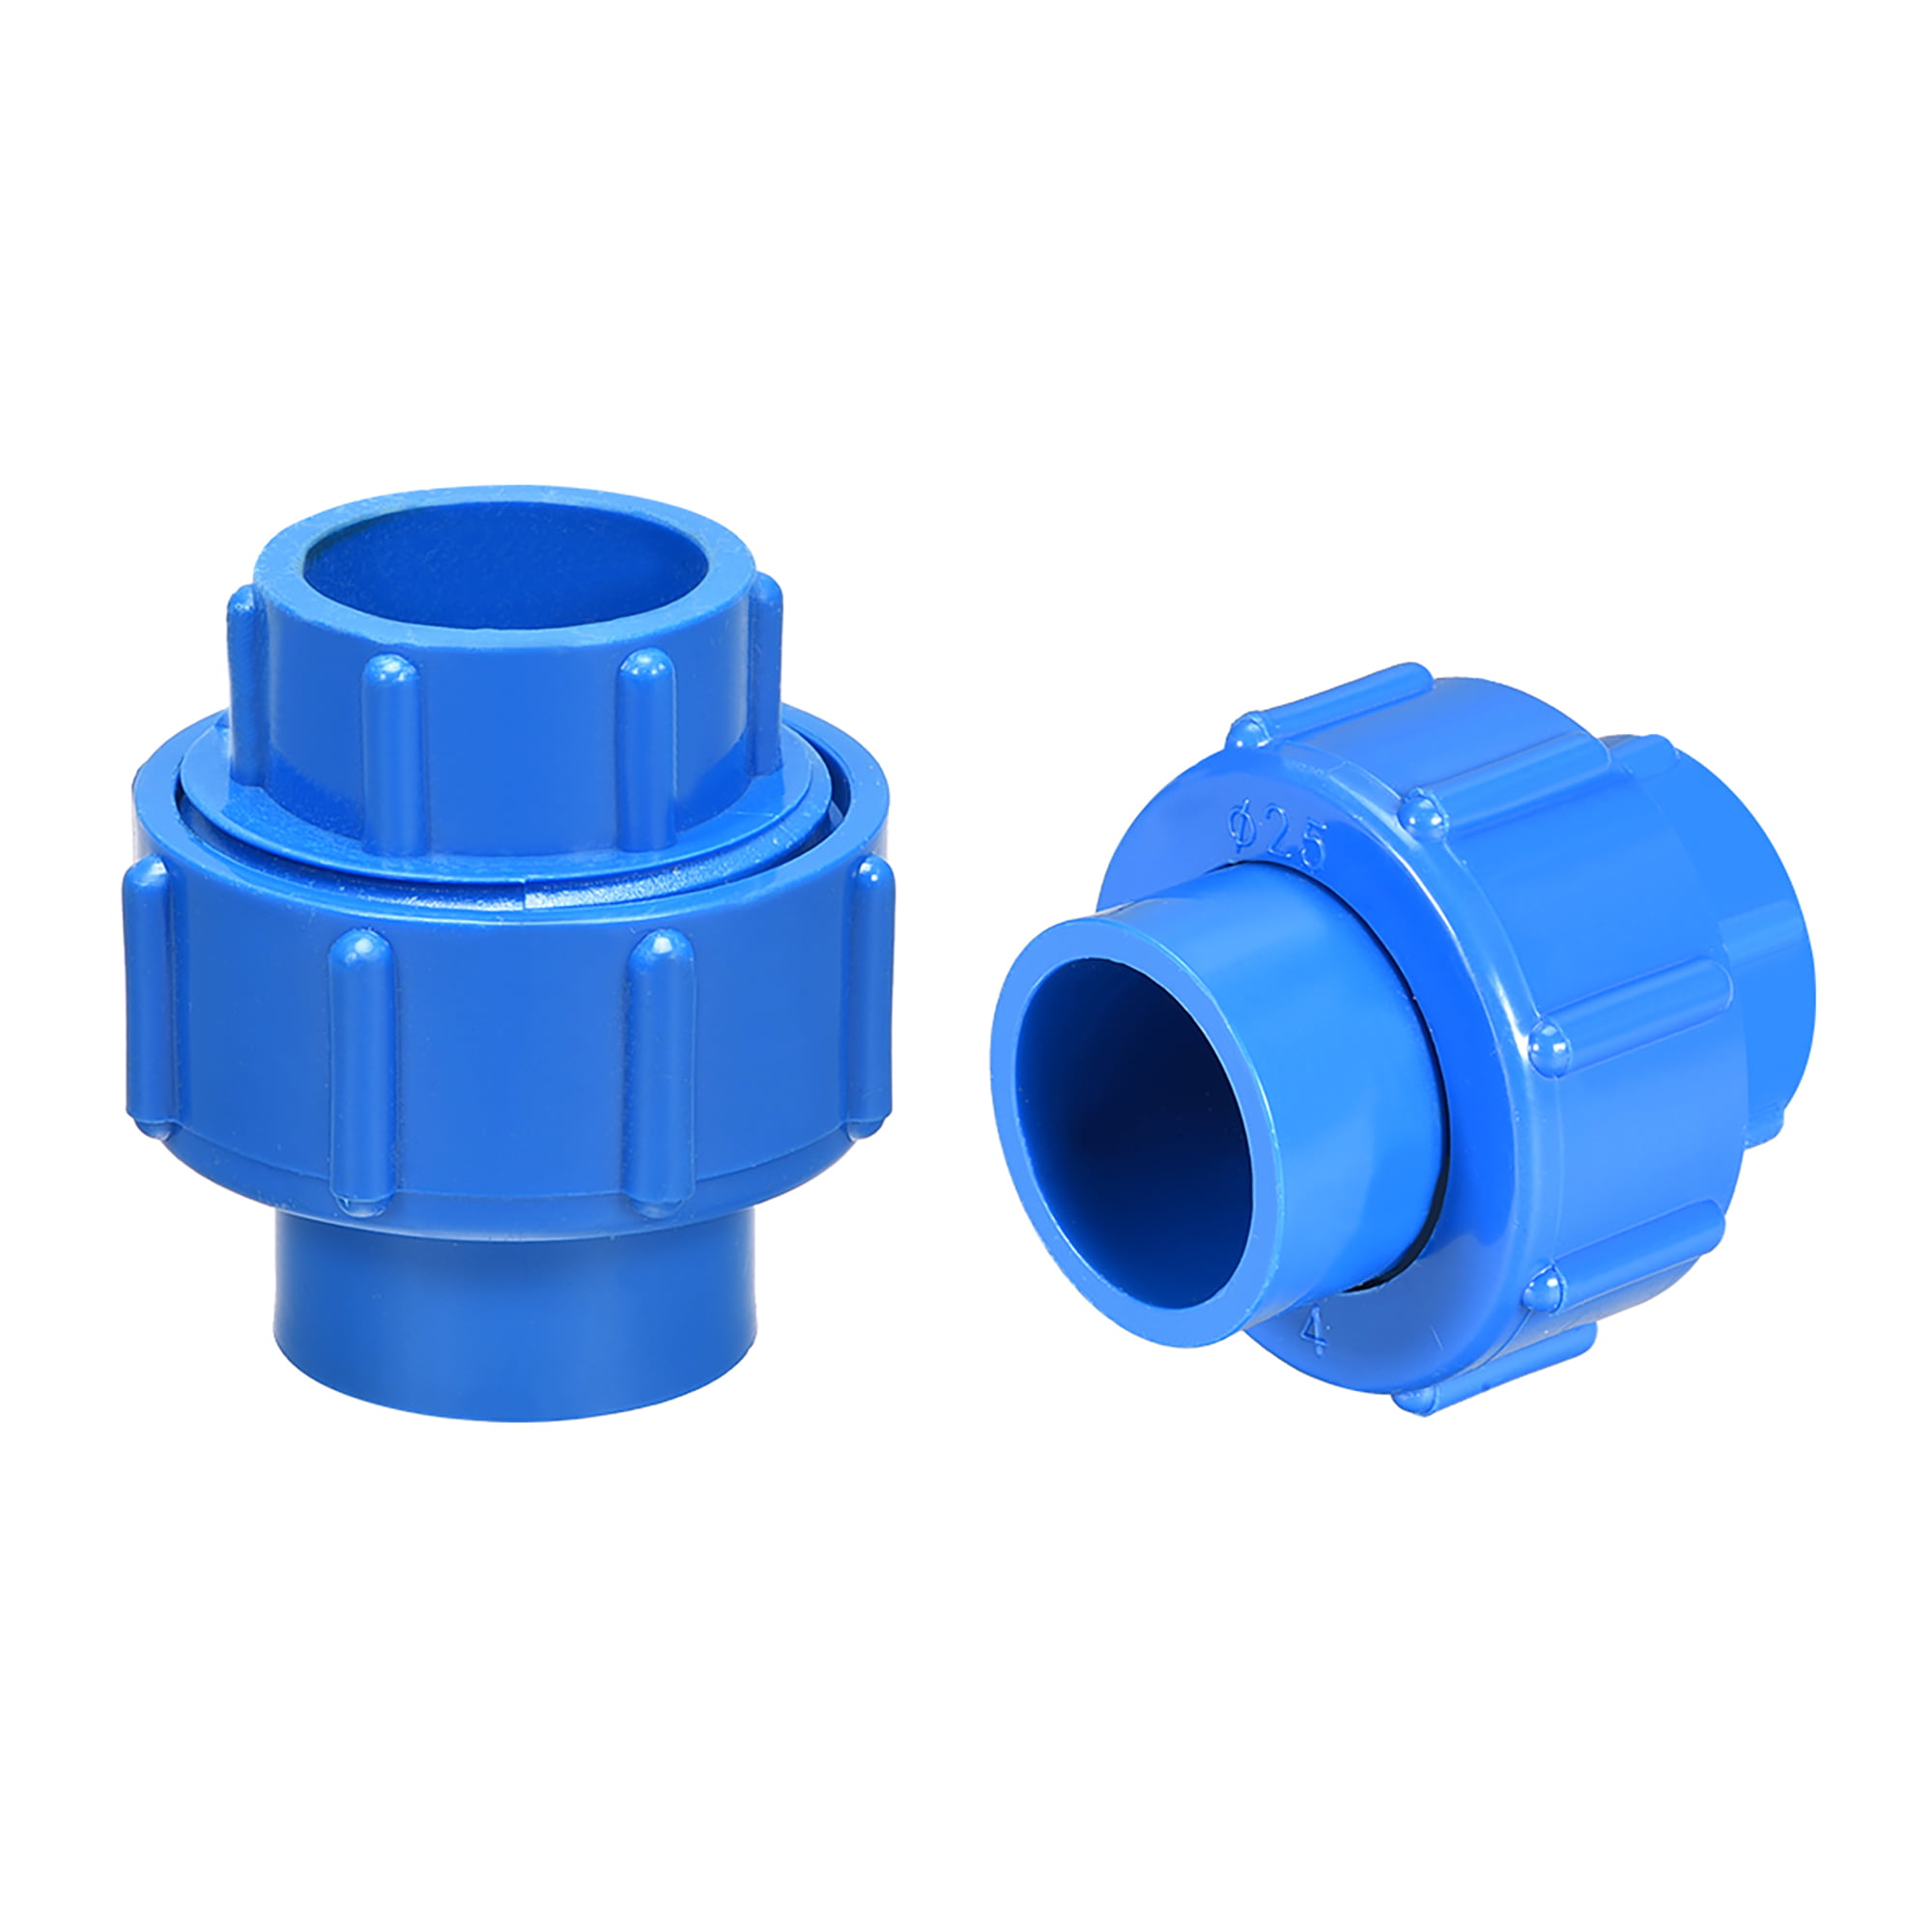 25mm x 25mm,PVC Pipe Fitting Union Solvent Socket Quick Connector Blue